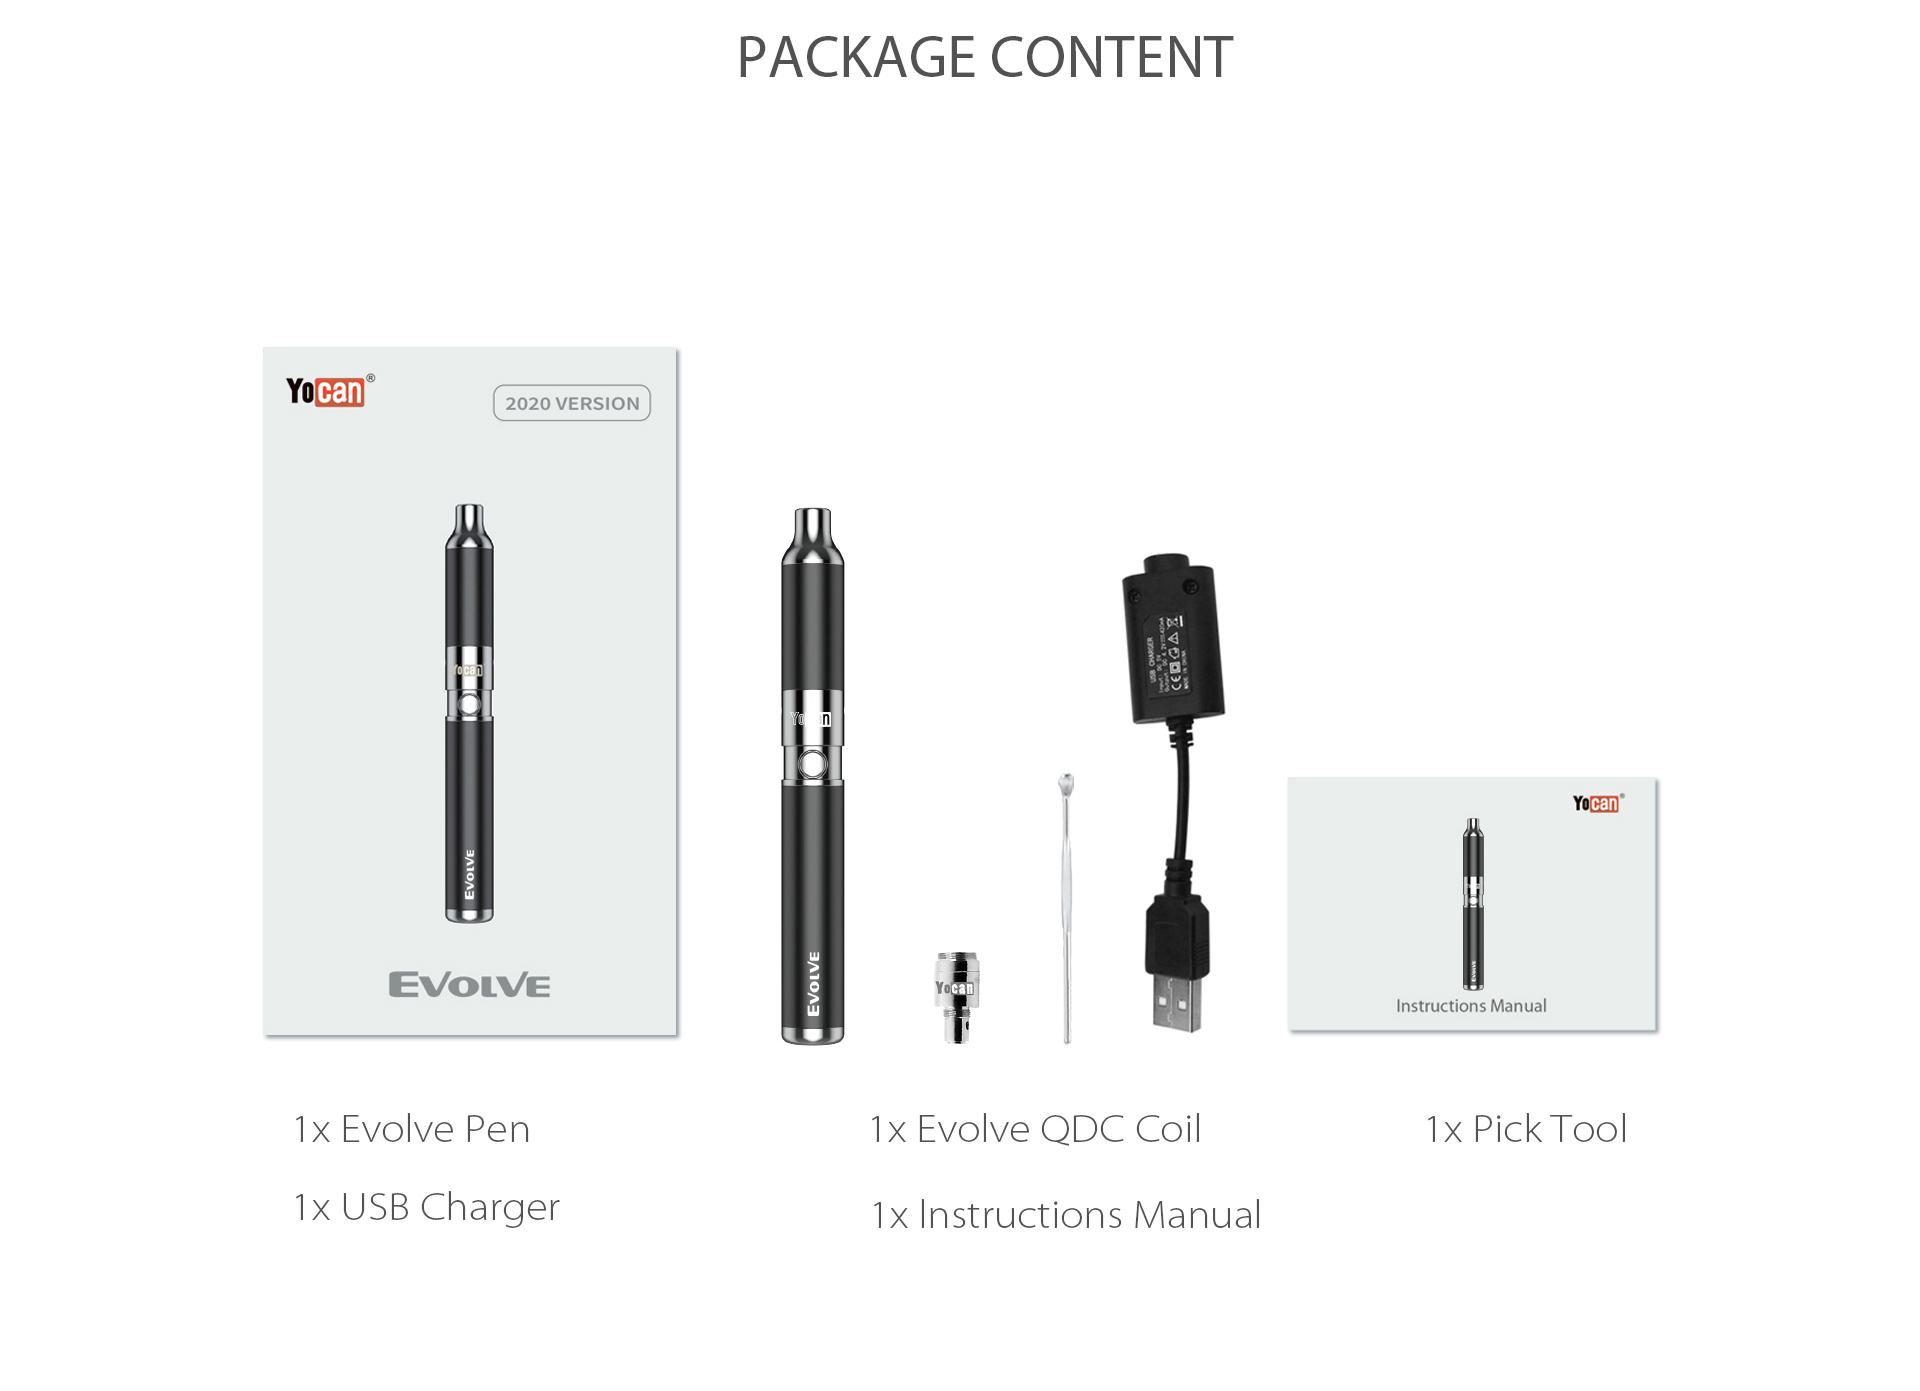 Yocan Evolve Vaporizer 2020 Version package content.